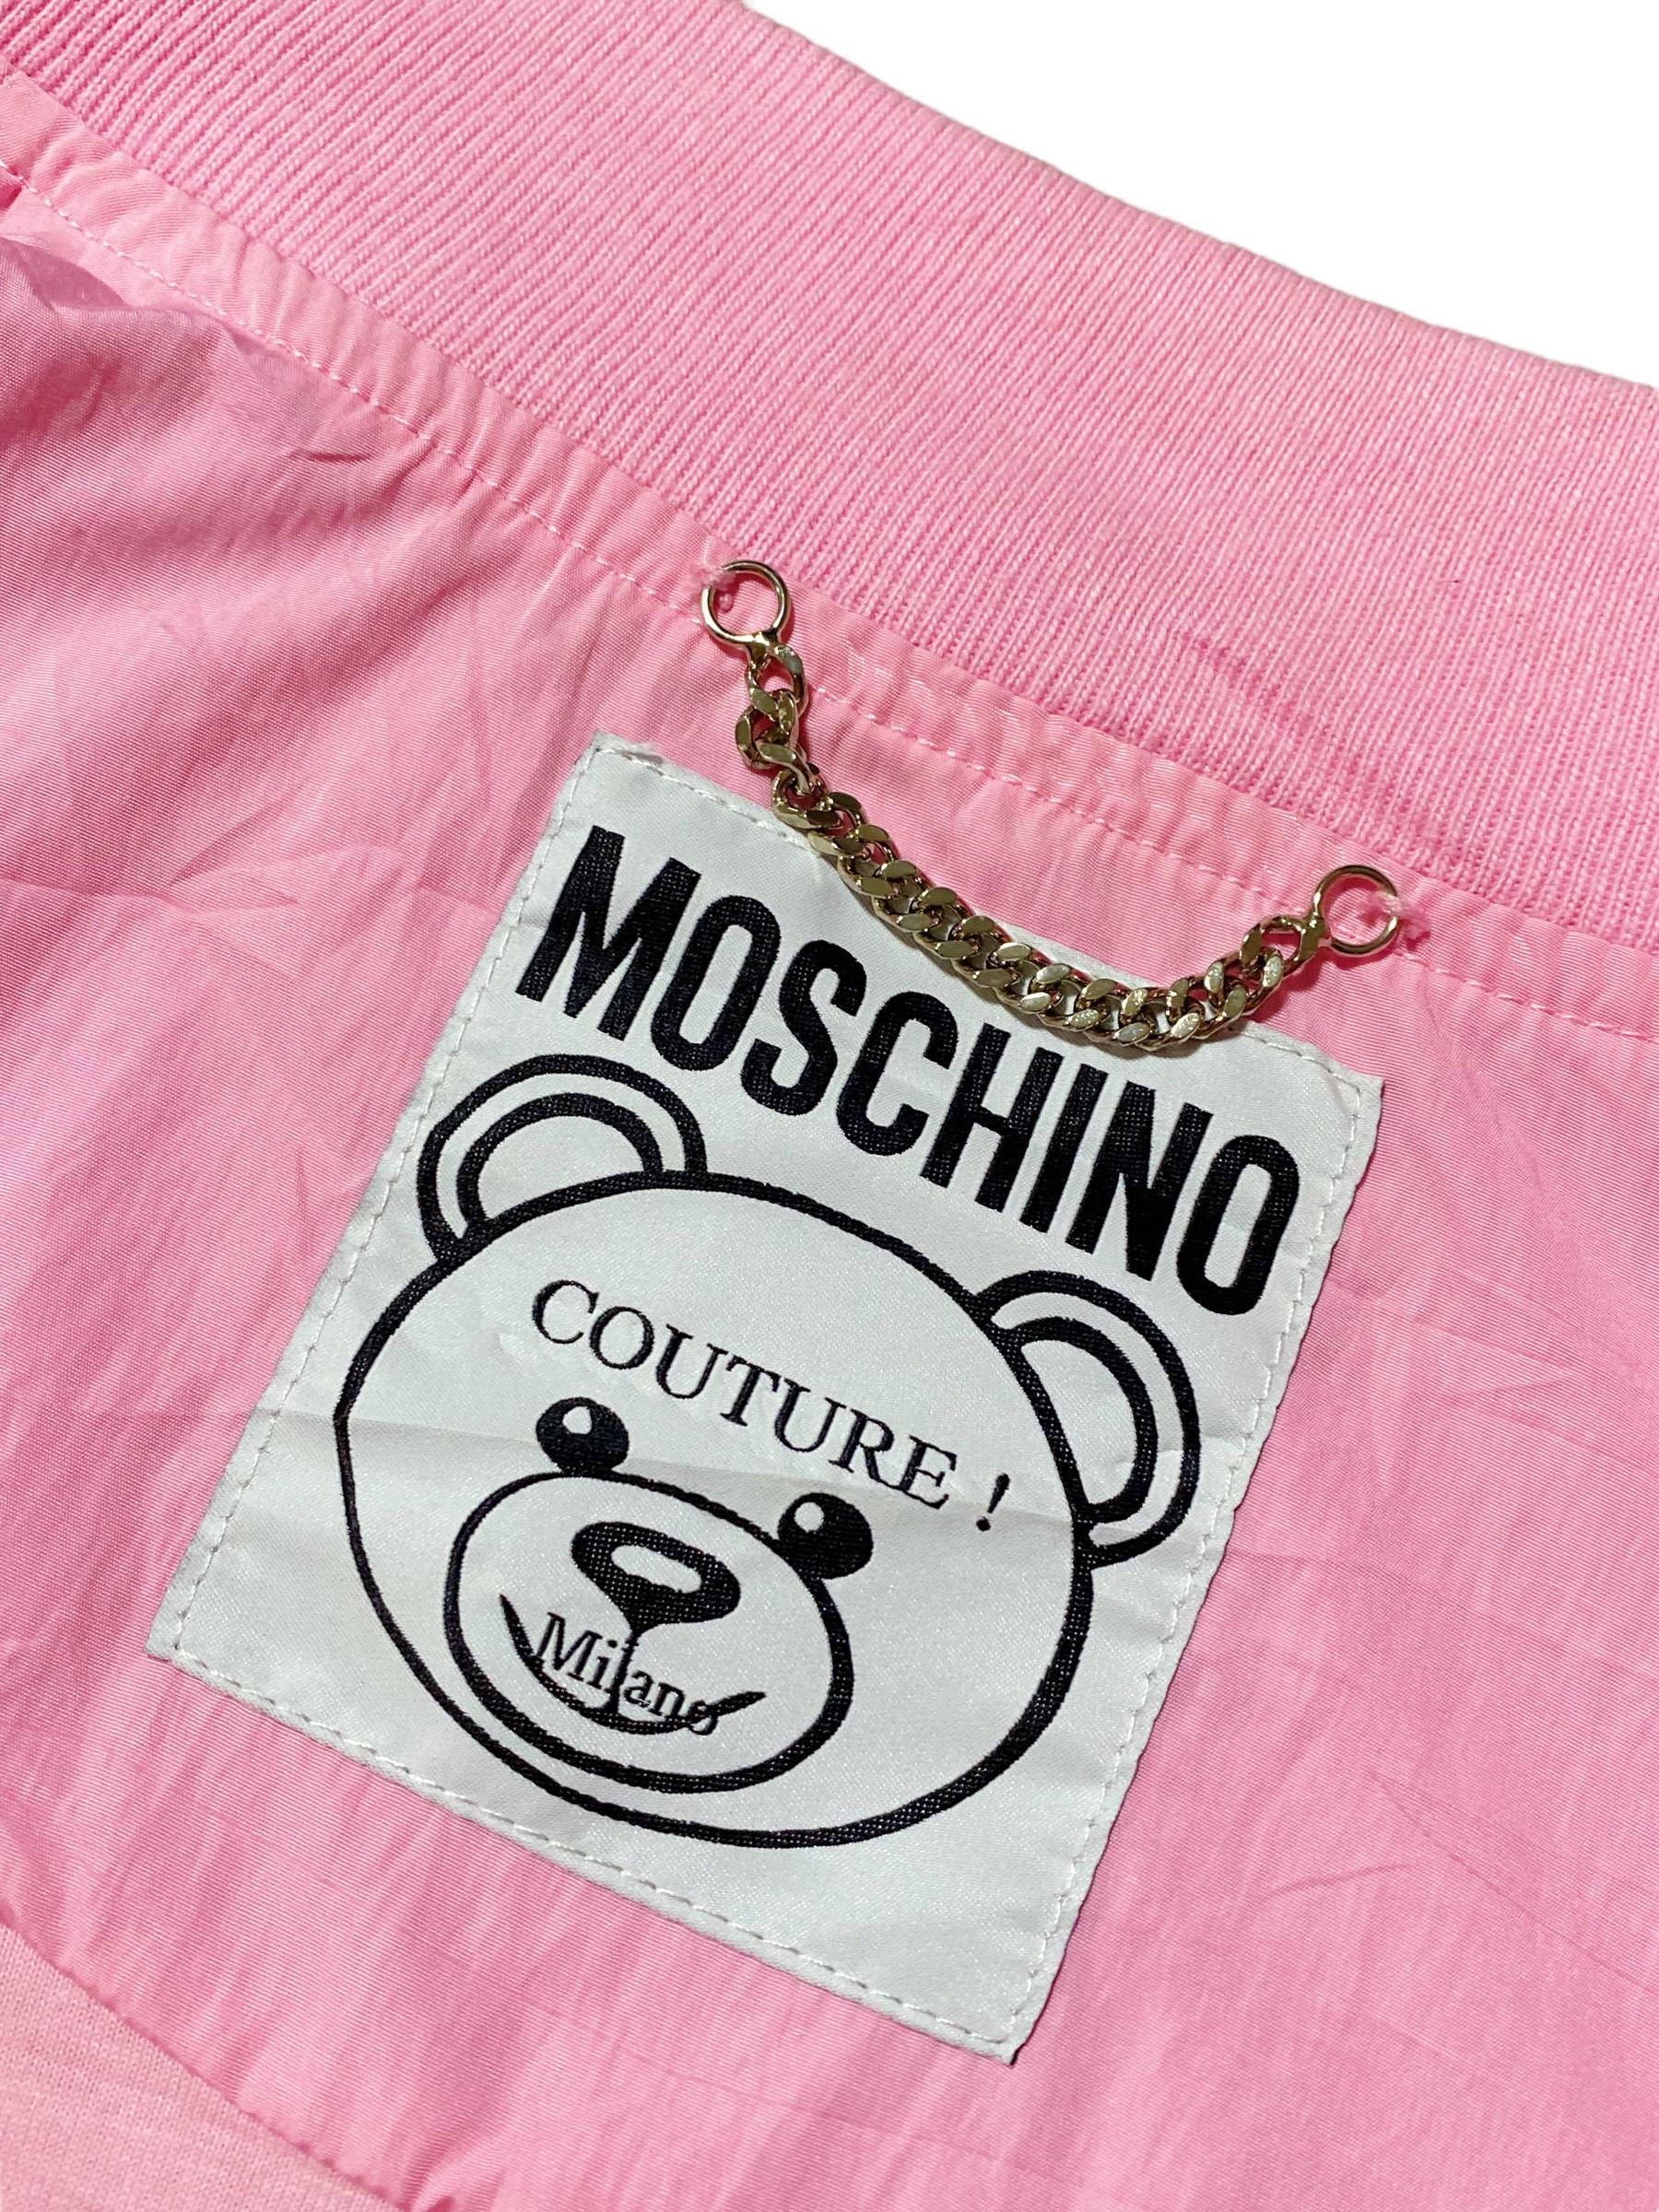 Women's Moschino Rare Sequin Teddy Bomber Jacket in Pink For Sale